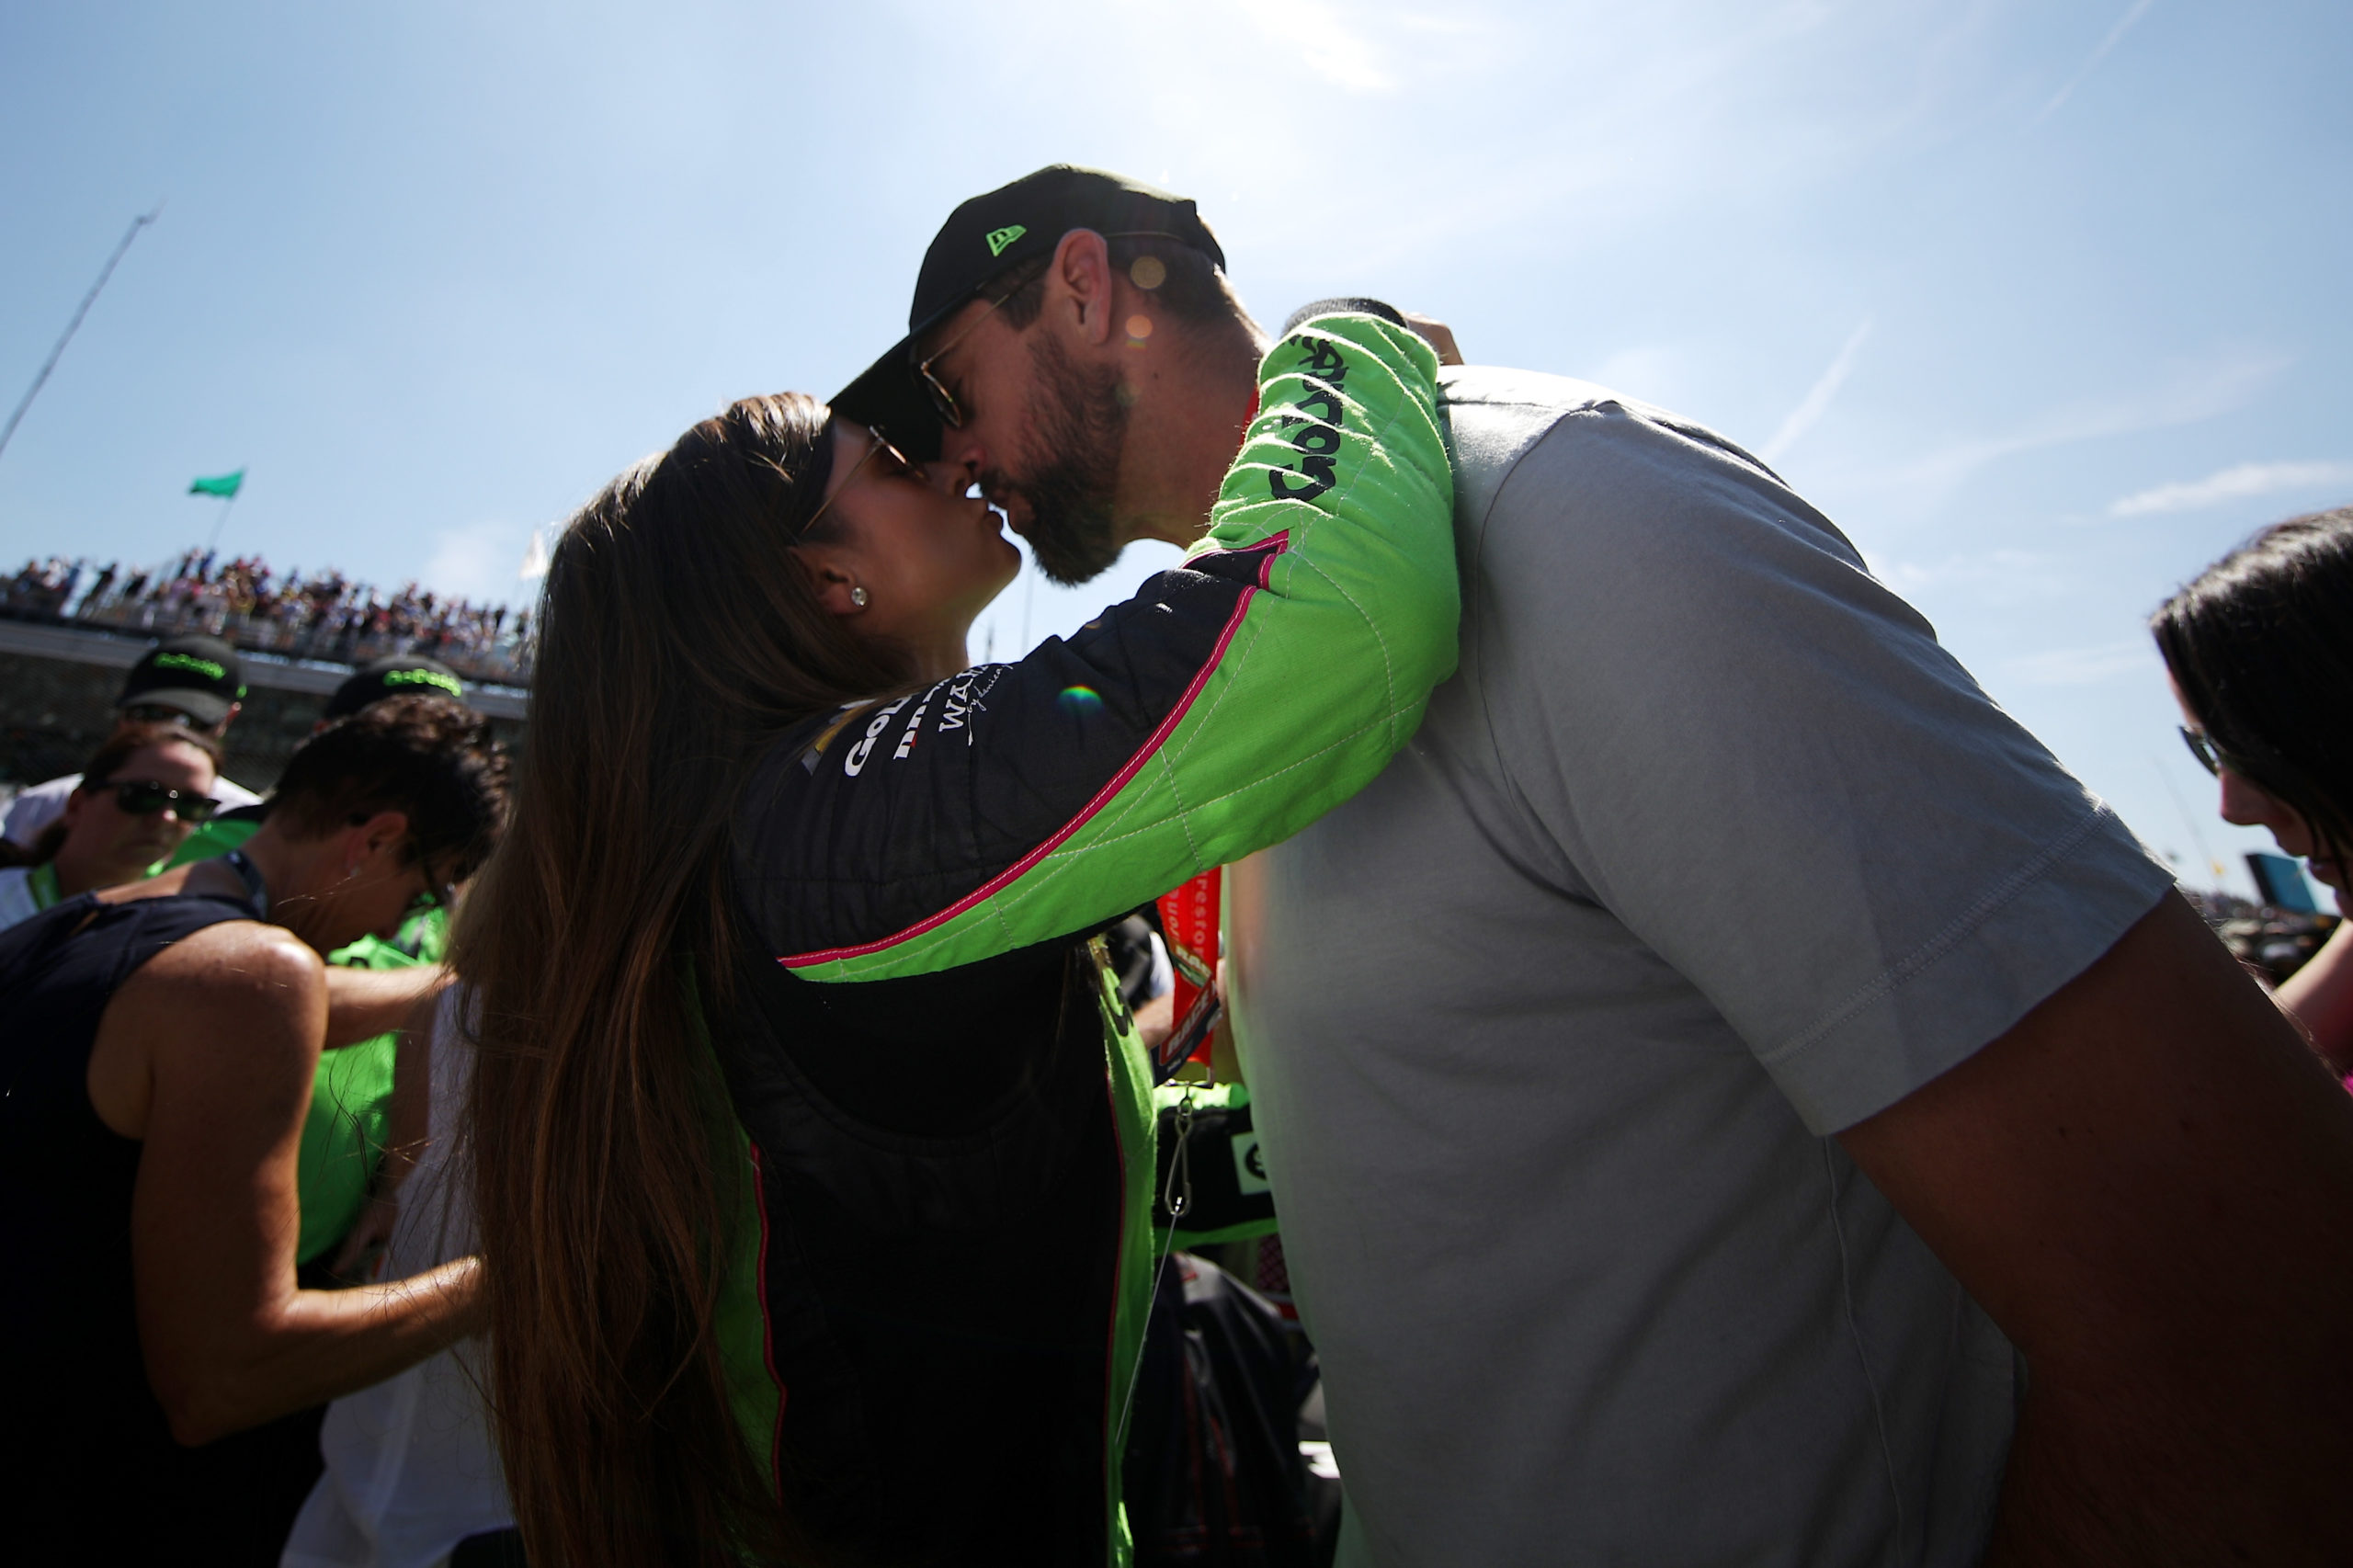 INDIANAPOLIS, IN - MAY 27: Danica Patrick, driver of the #13 GoDaddy Chevrolet kisses Aaron Rodgers prior to the 102nd Running of the Indianapolis 500 at Indianapolis Motorspeedway on May 27, 2018 in Indianapolis, Indiana. Chris Graythen/Getty Images